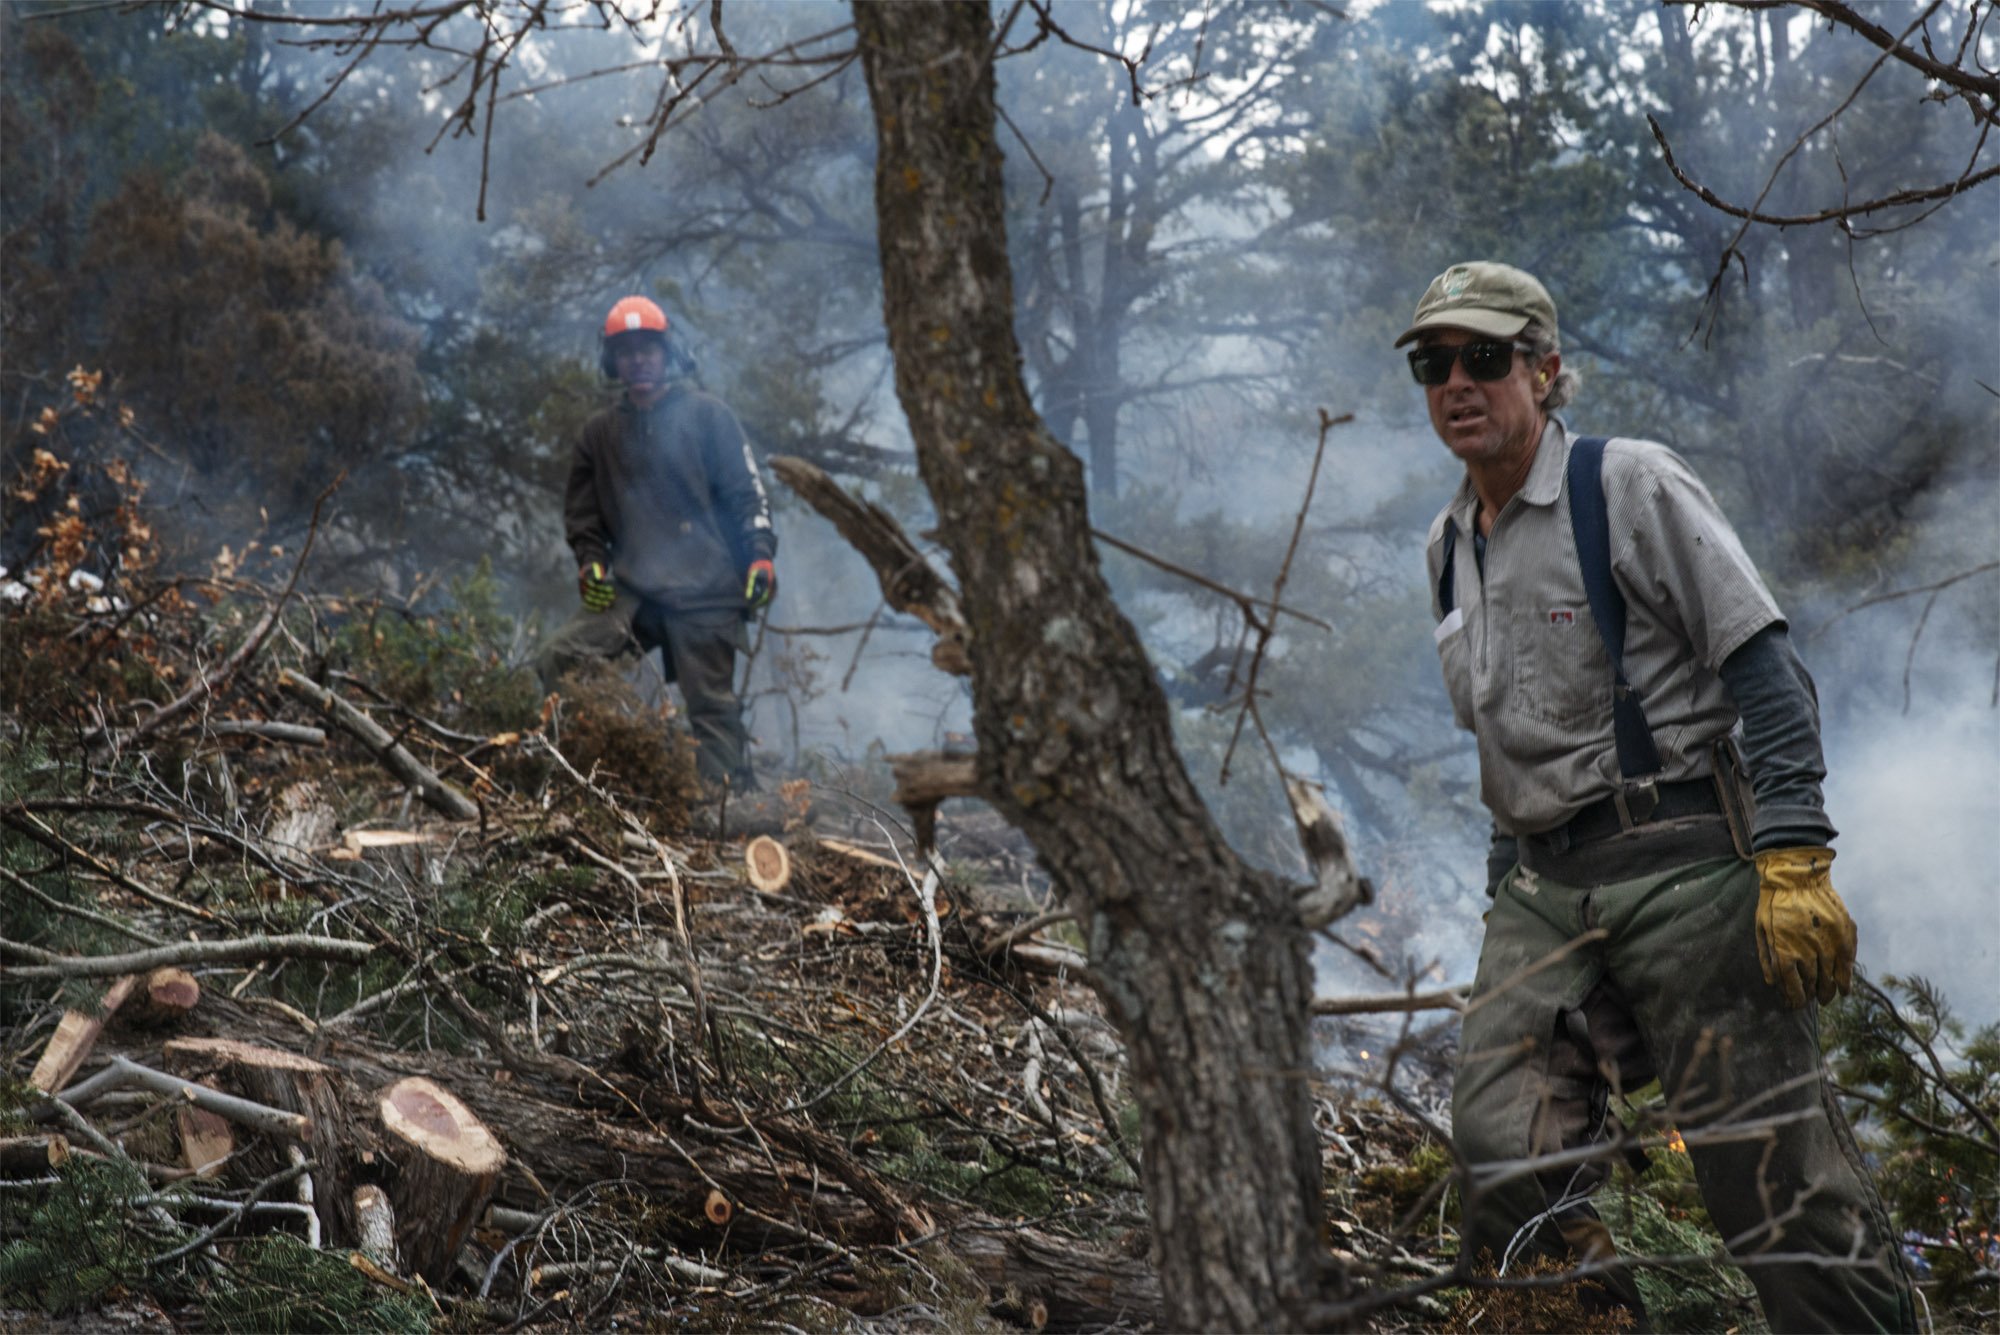   Mark Scheutz, forestry crew leader, and Smoke Romero survey their lop-and-scatter and controlled burn thinning efforts on the slopes of El Salto.  